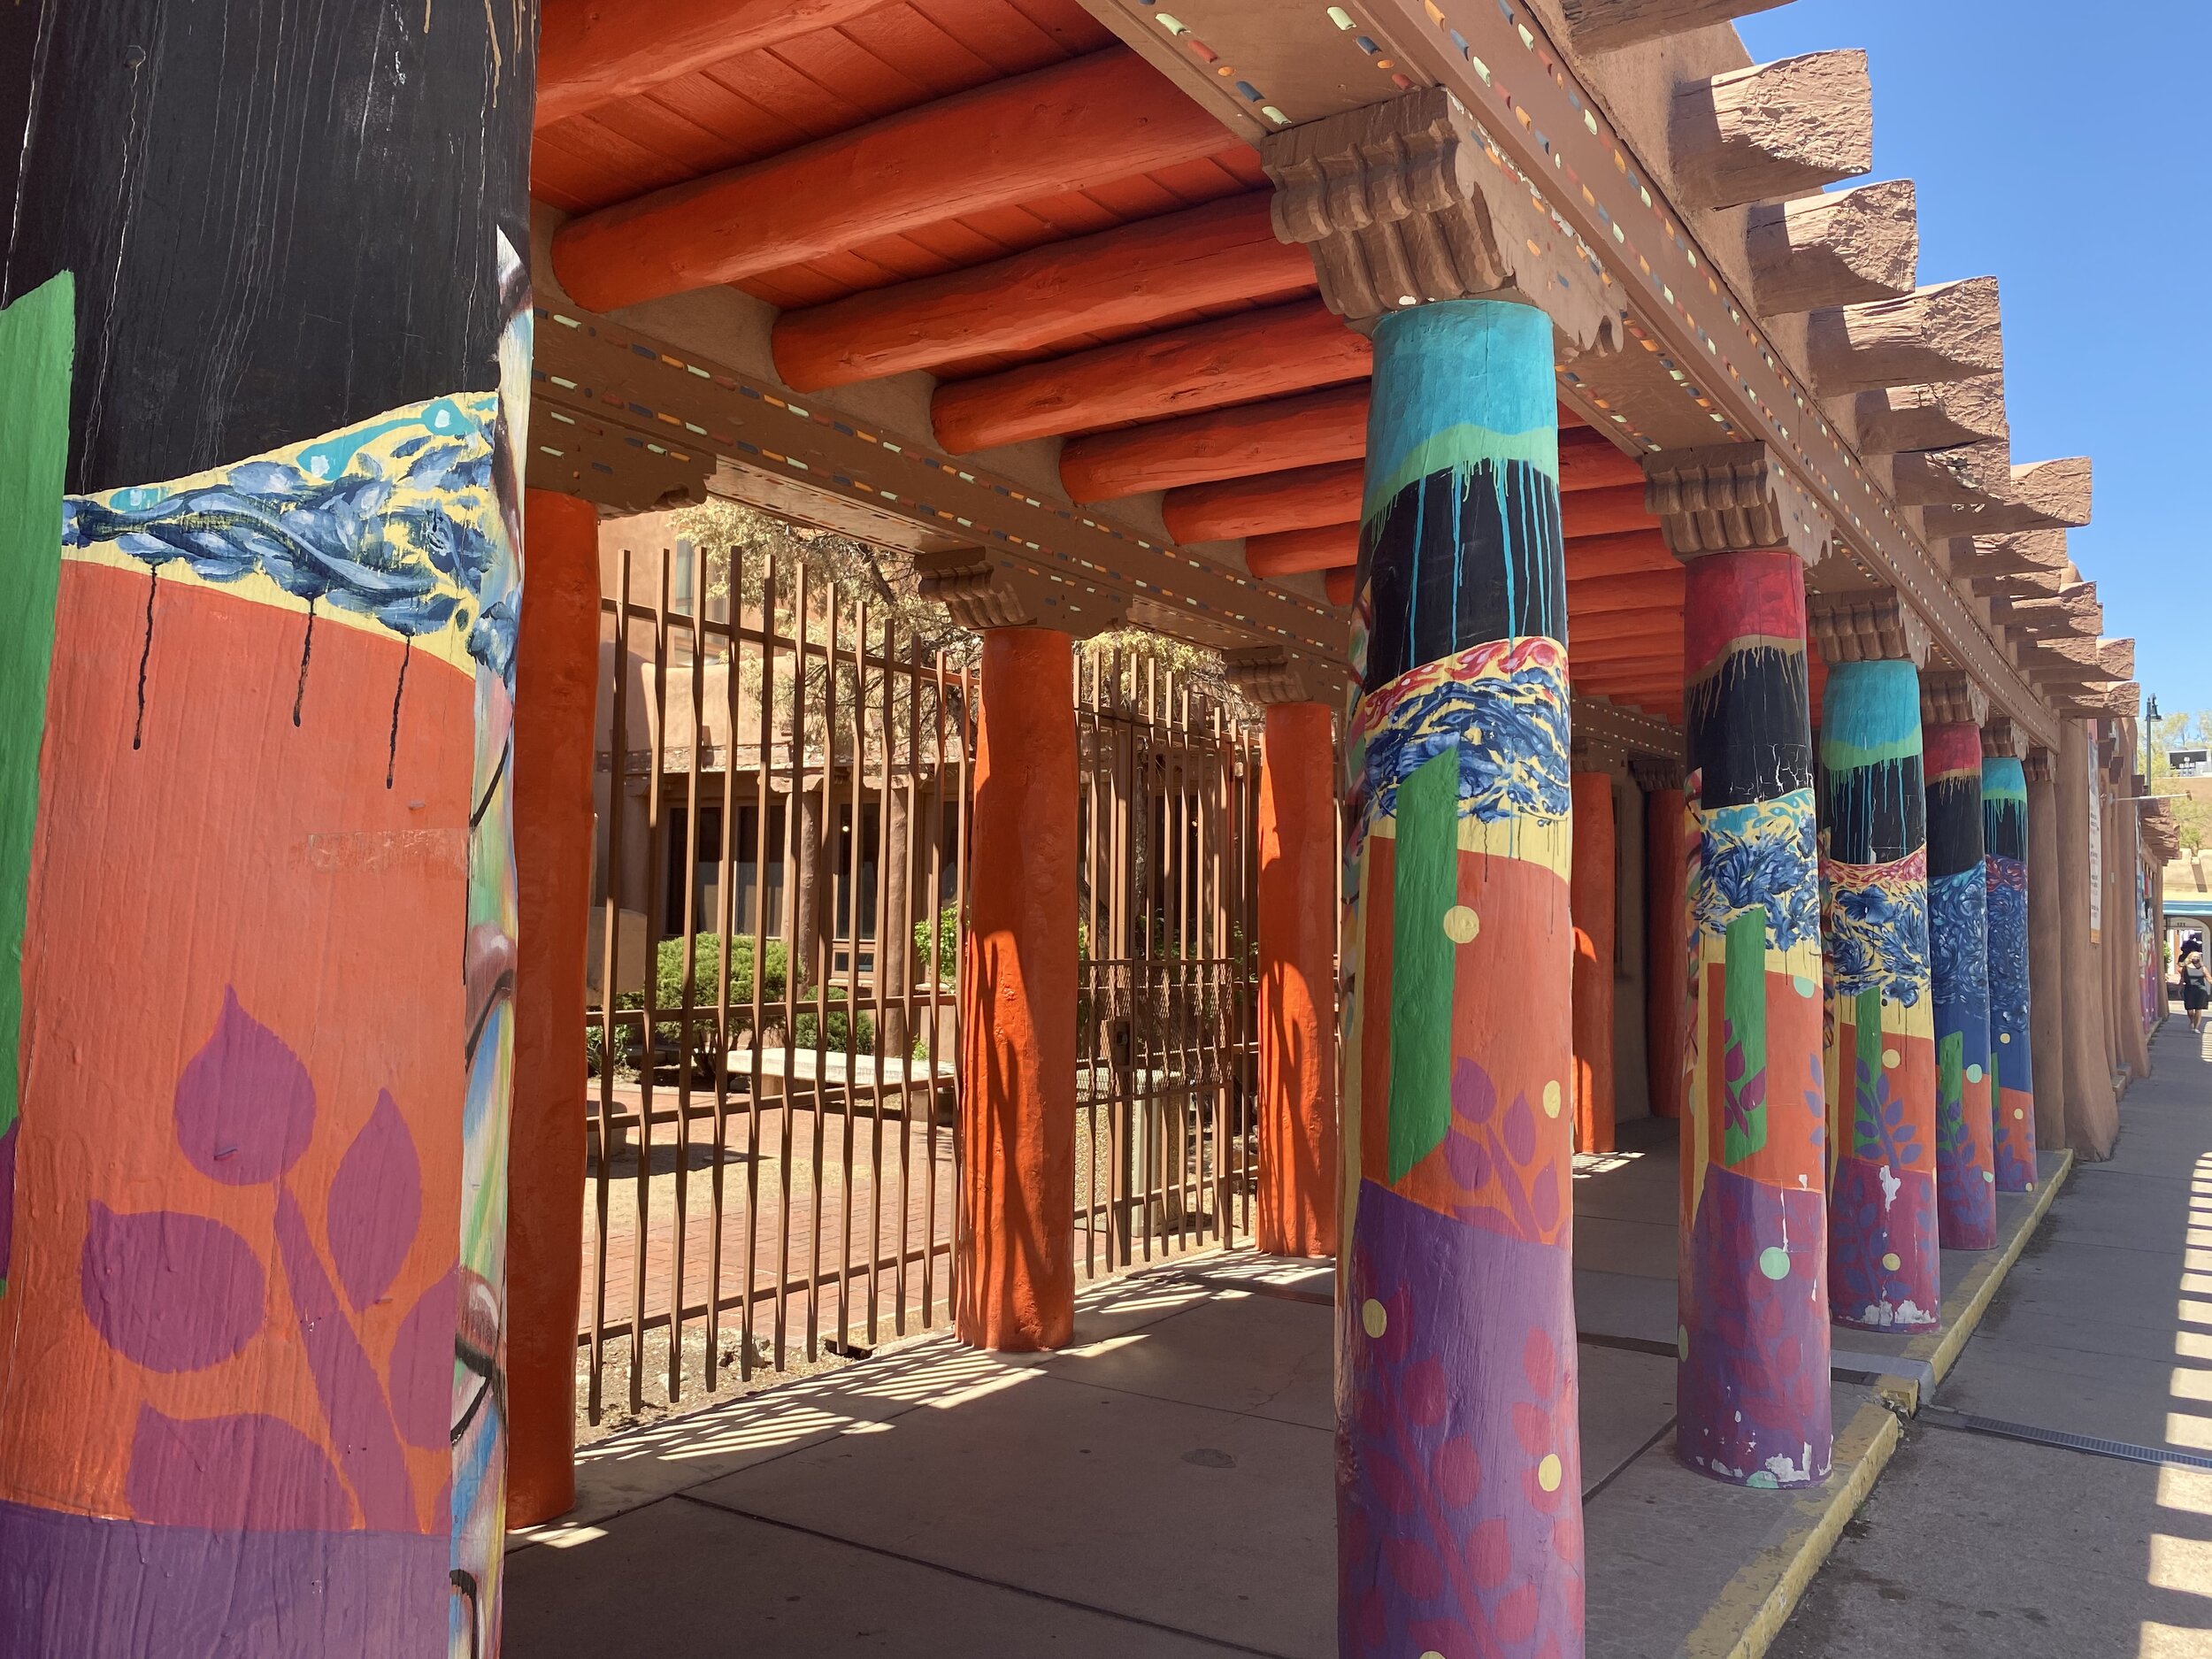 Colorfully painted pillars on a museum building in Santa Fe, New Mexico